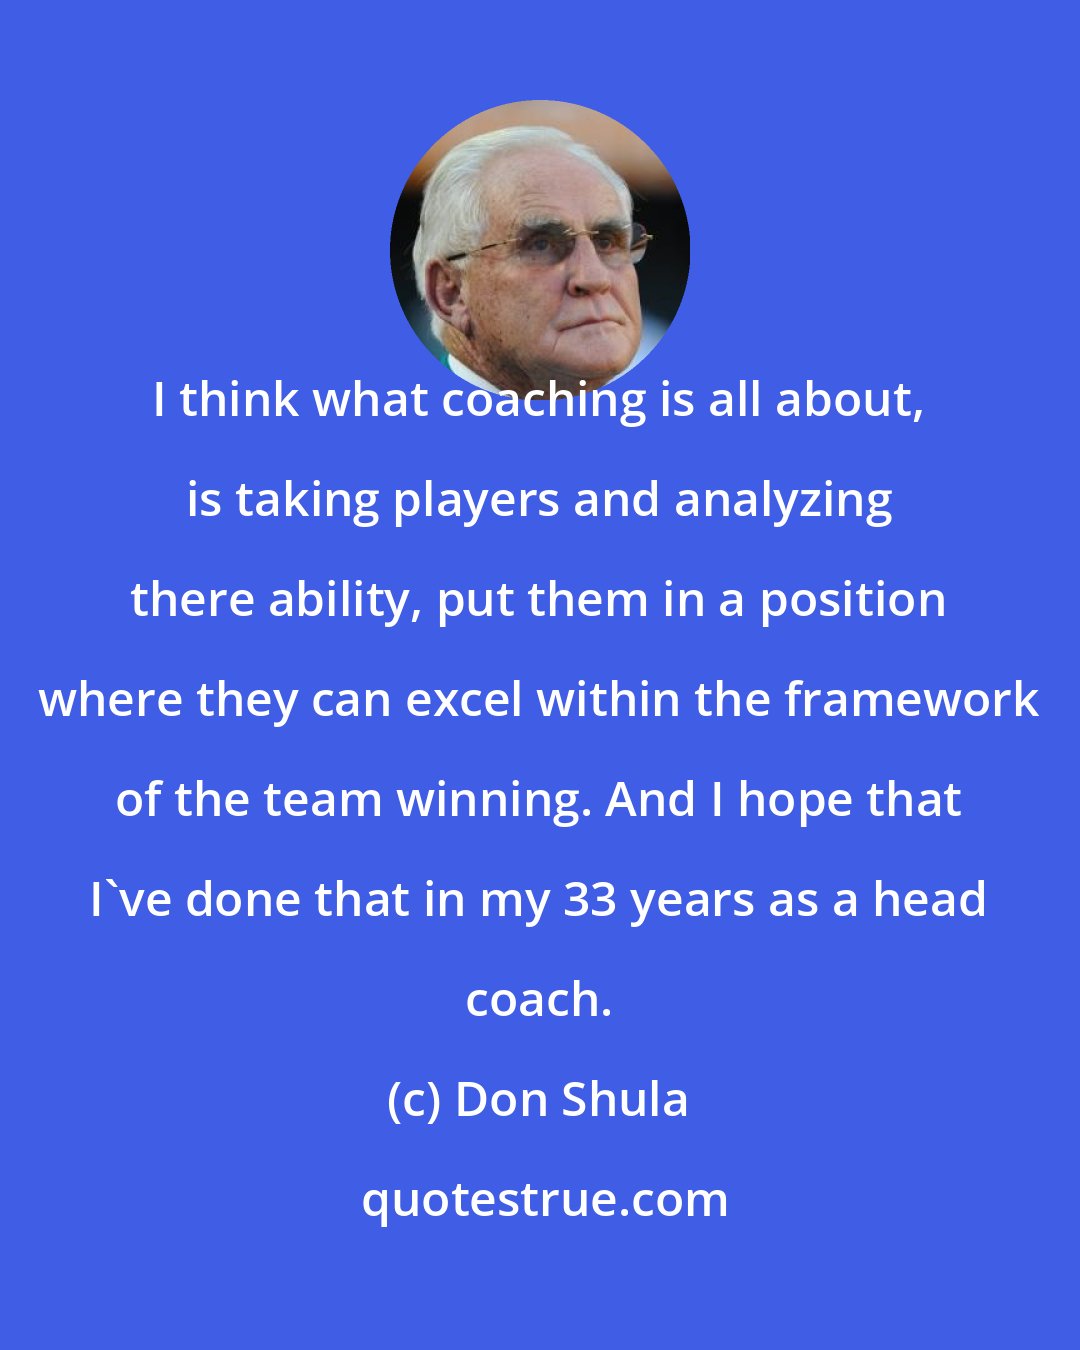 Don Shula: I think what coaching is all about, is taking players and analyzing there ability, put them in a position where they can excel within the framework of the team winning. And I hope that I've done that in my 33 years as a head coach.